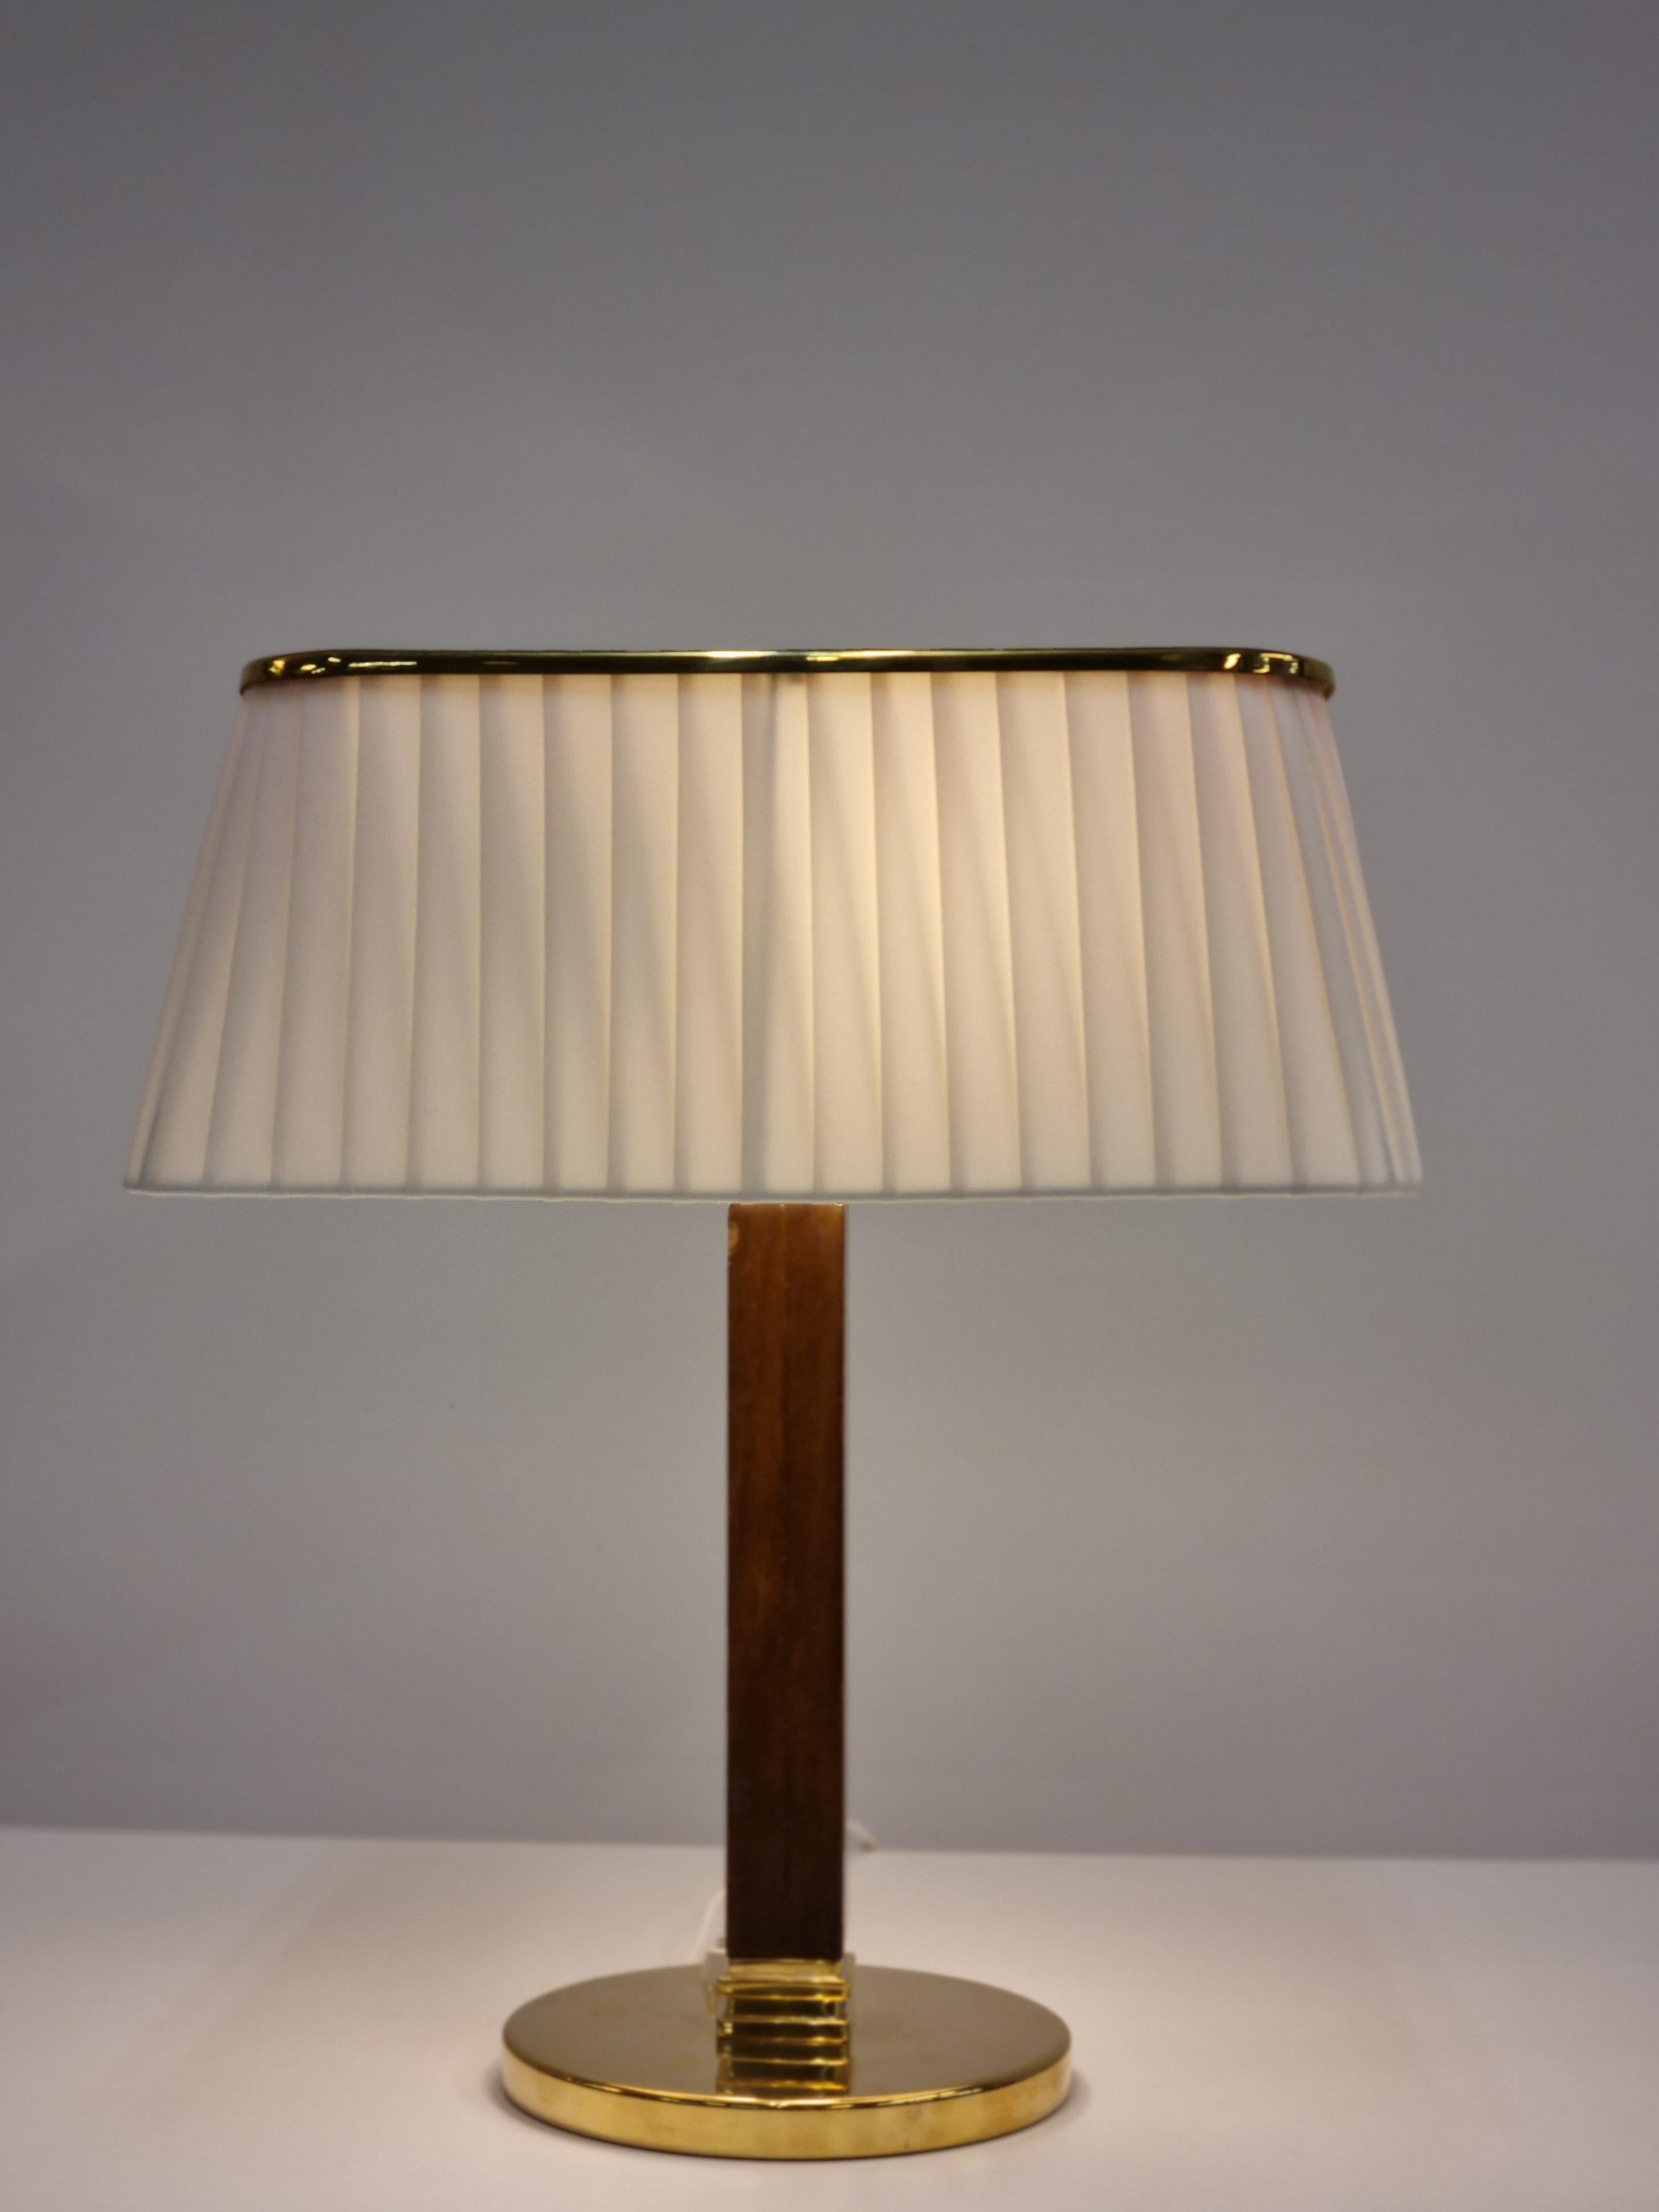 This table lamp model 5066 by Paavo Tynell for Taito Oy from 1950s is a classic. It has a brass round stand, a hard wooden leg and a beautiful light colored pleated textile shade. The square brass shade top has a fibonacci sequence perforation and